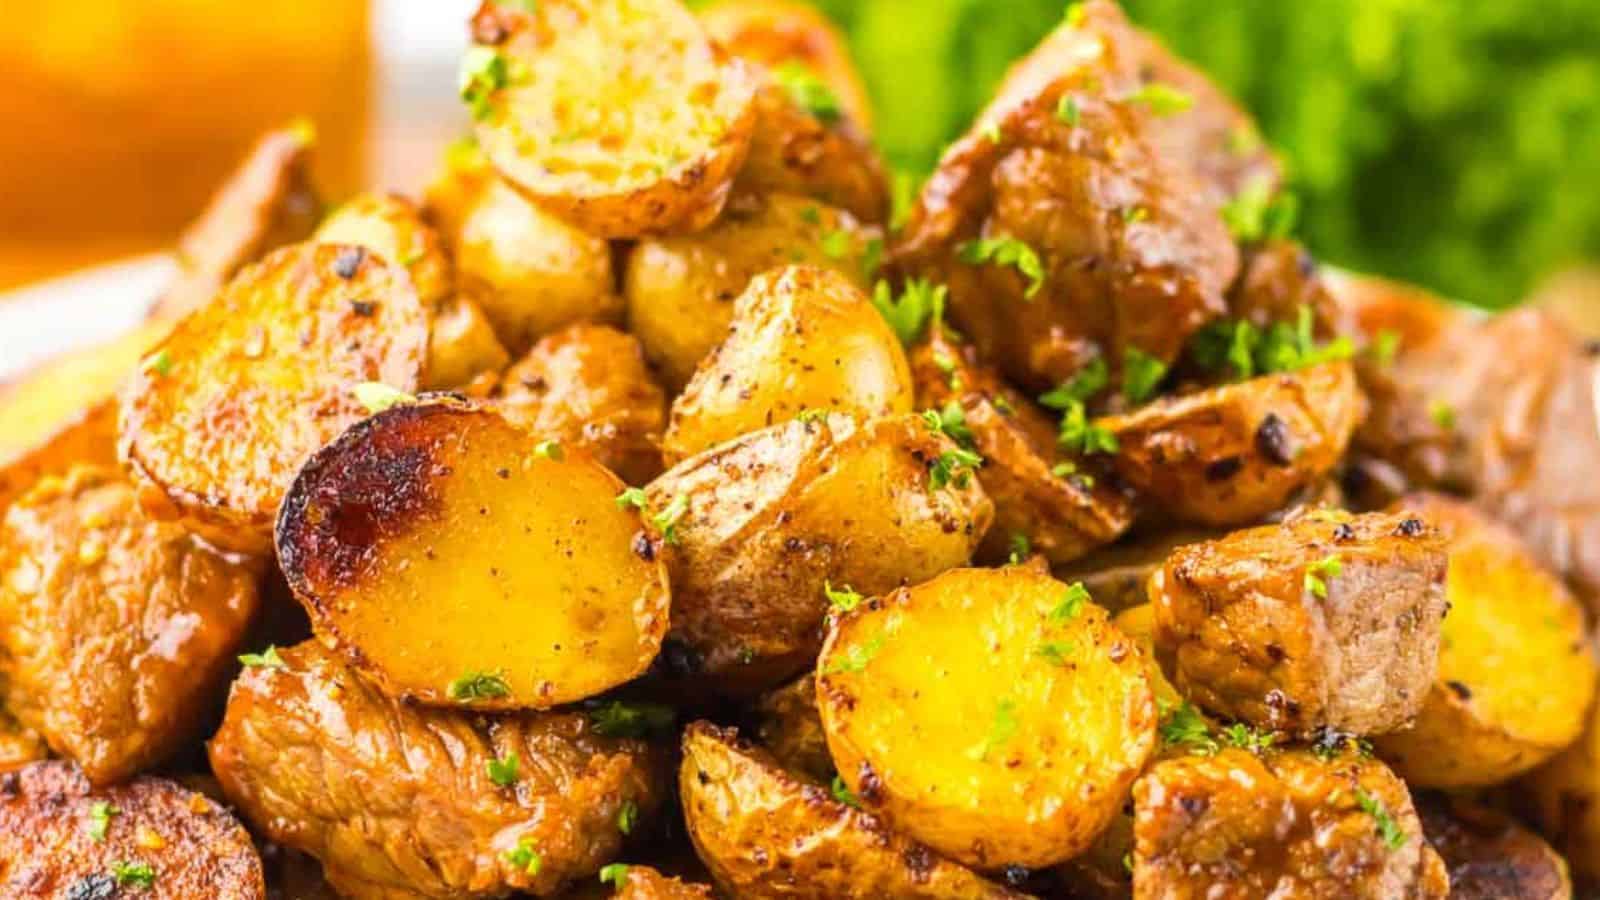 A close-up image of honey chipotle seasoned roasted potatoes garnished with parsley, served alongside grilled steak and lettuce.